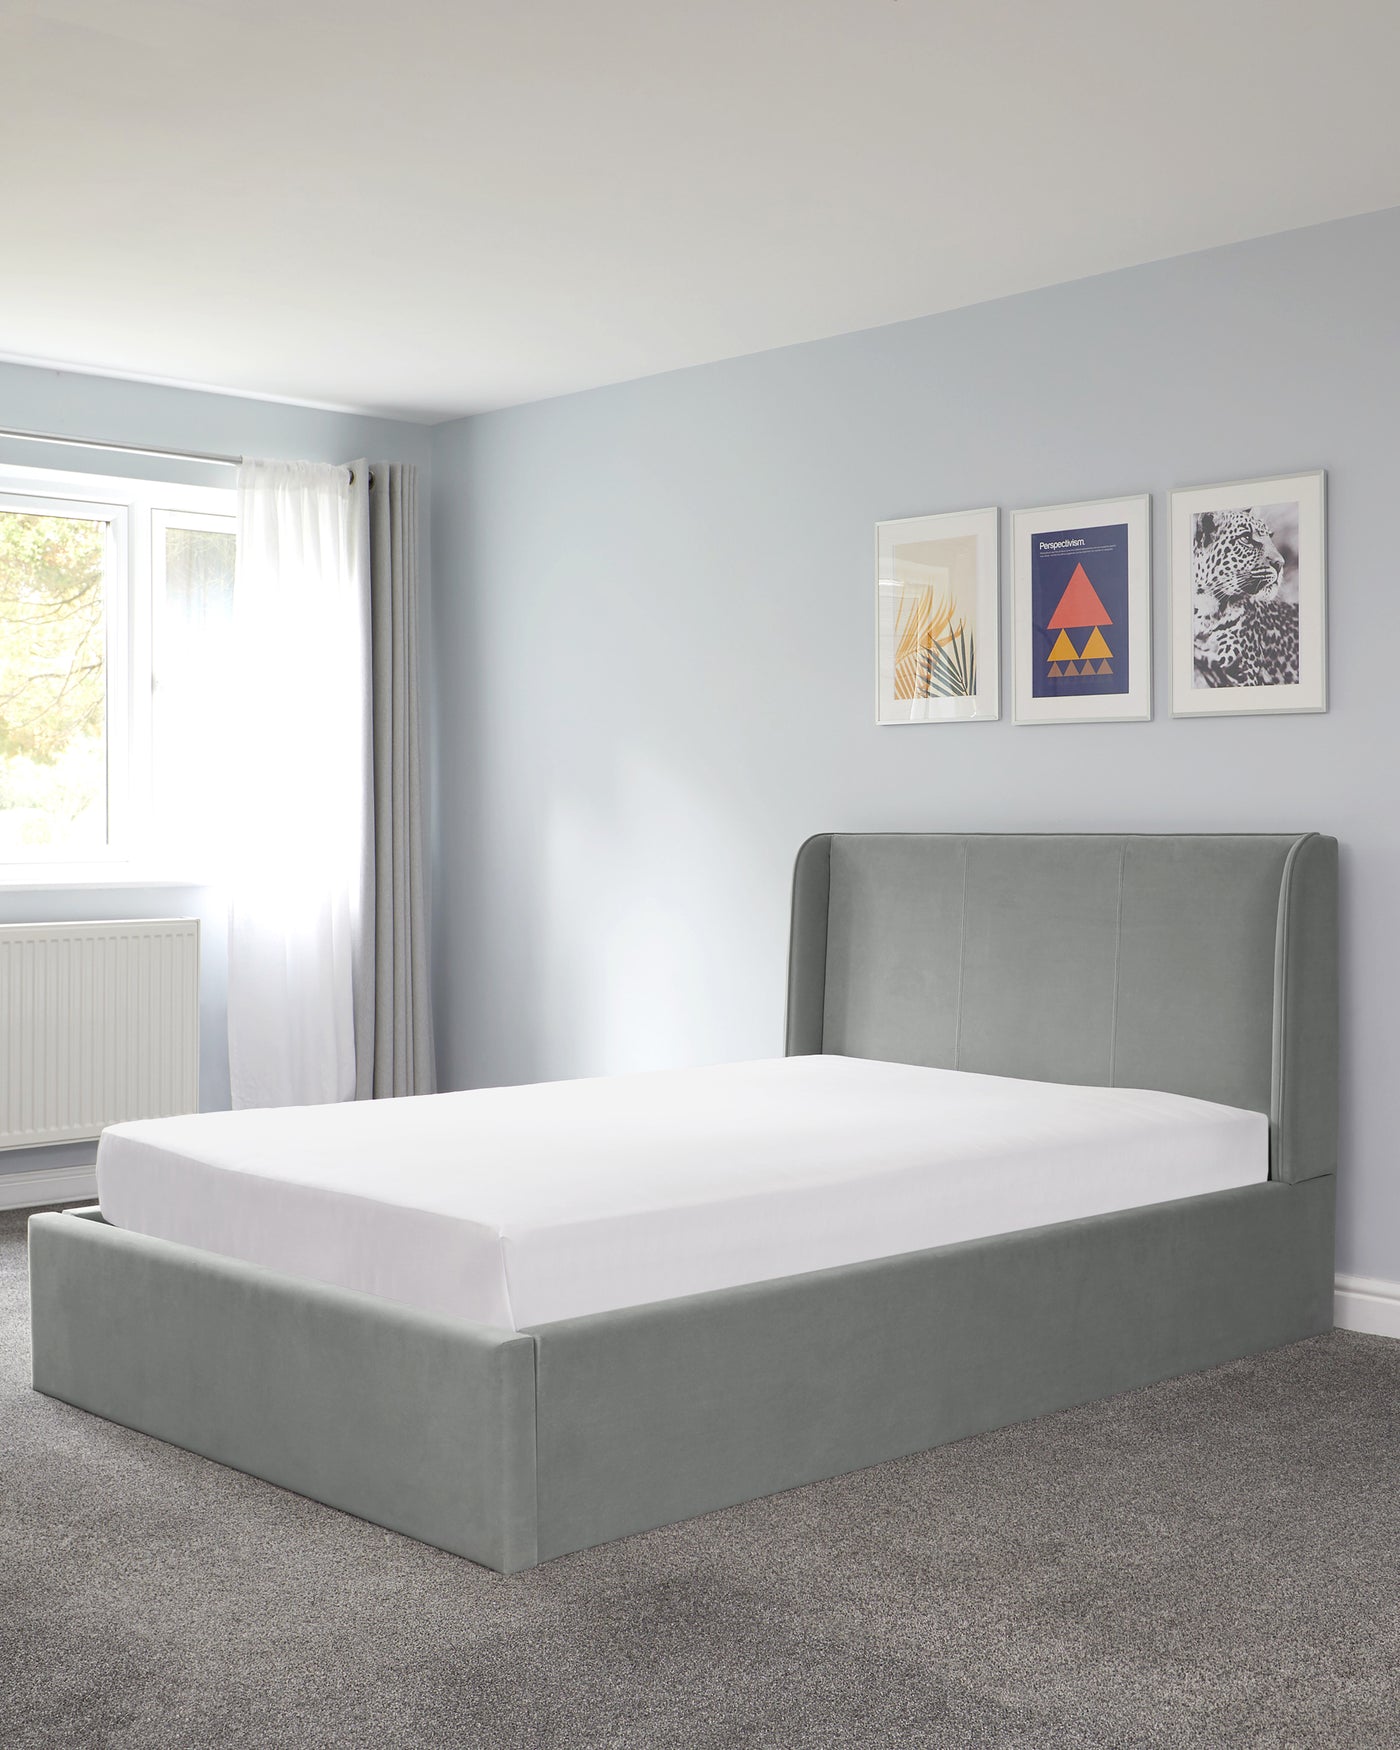 A modern grey upholstered bed frame with a gently curved headboard and no visible beddings or pillows.